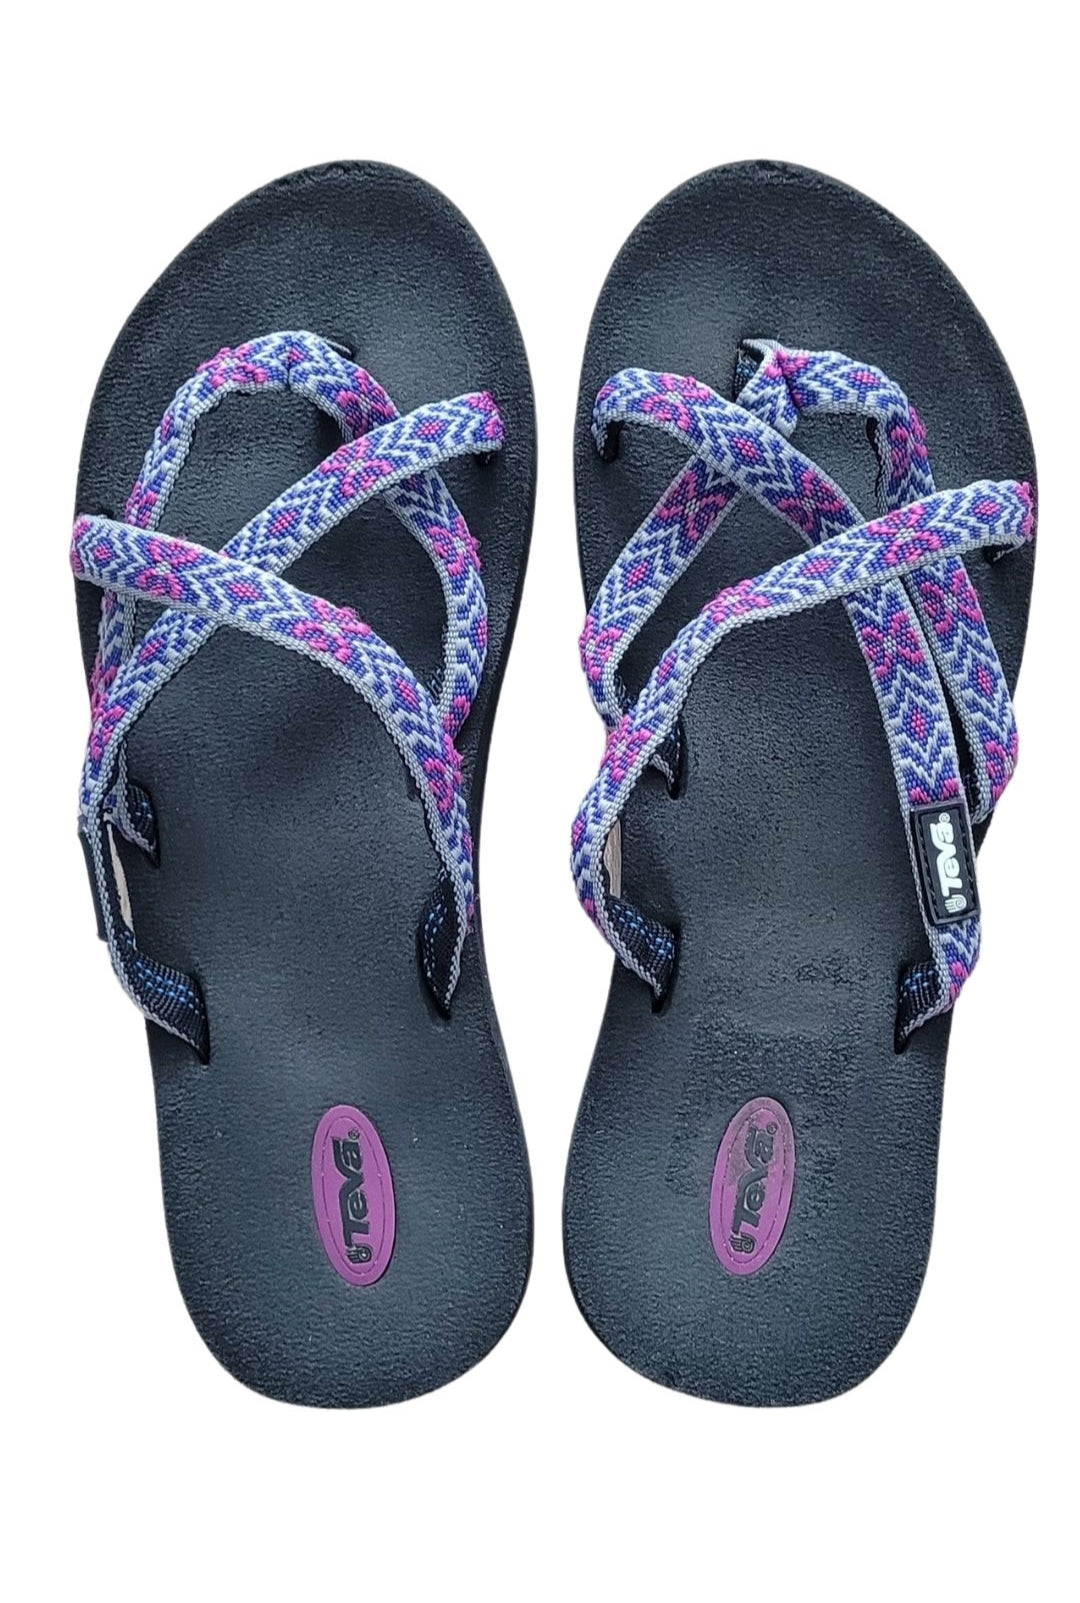 Used Kids Olowahu Sandal by Teva Youth Size 5-Purple and Pink